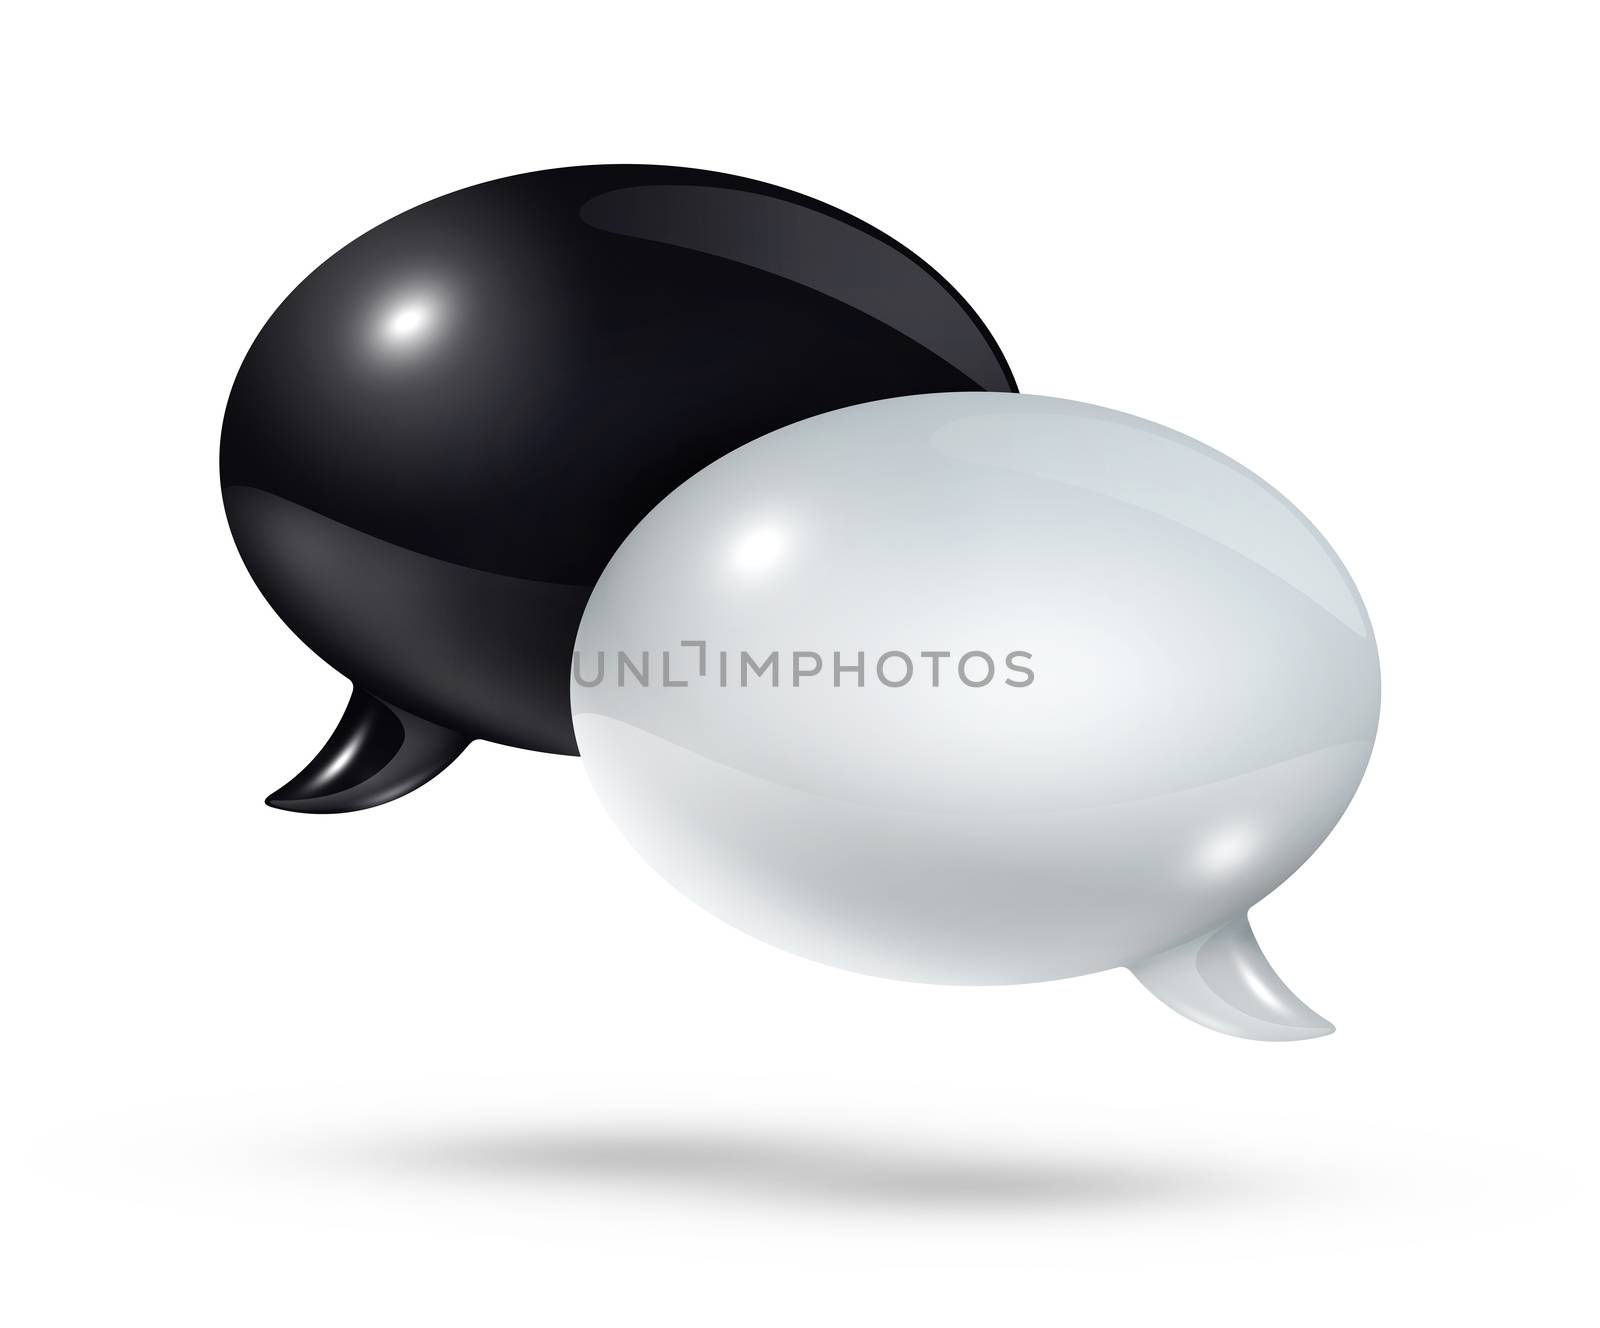 Black and white speech bubbles by daboost